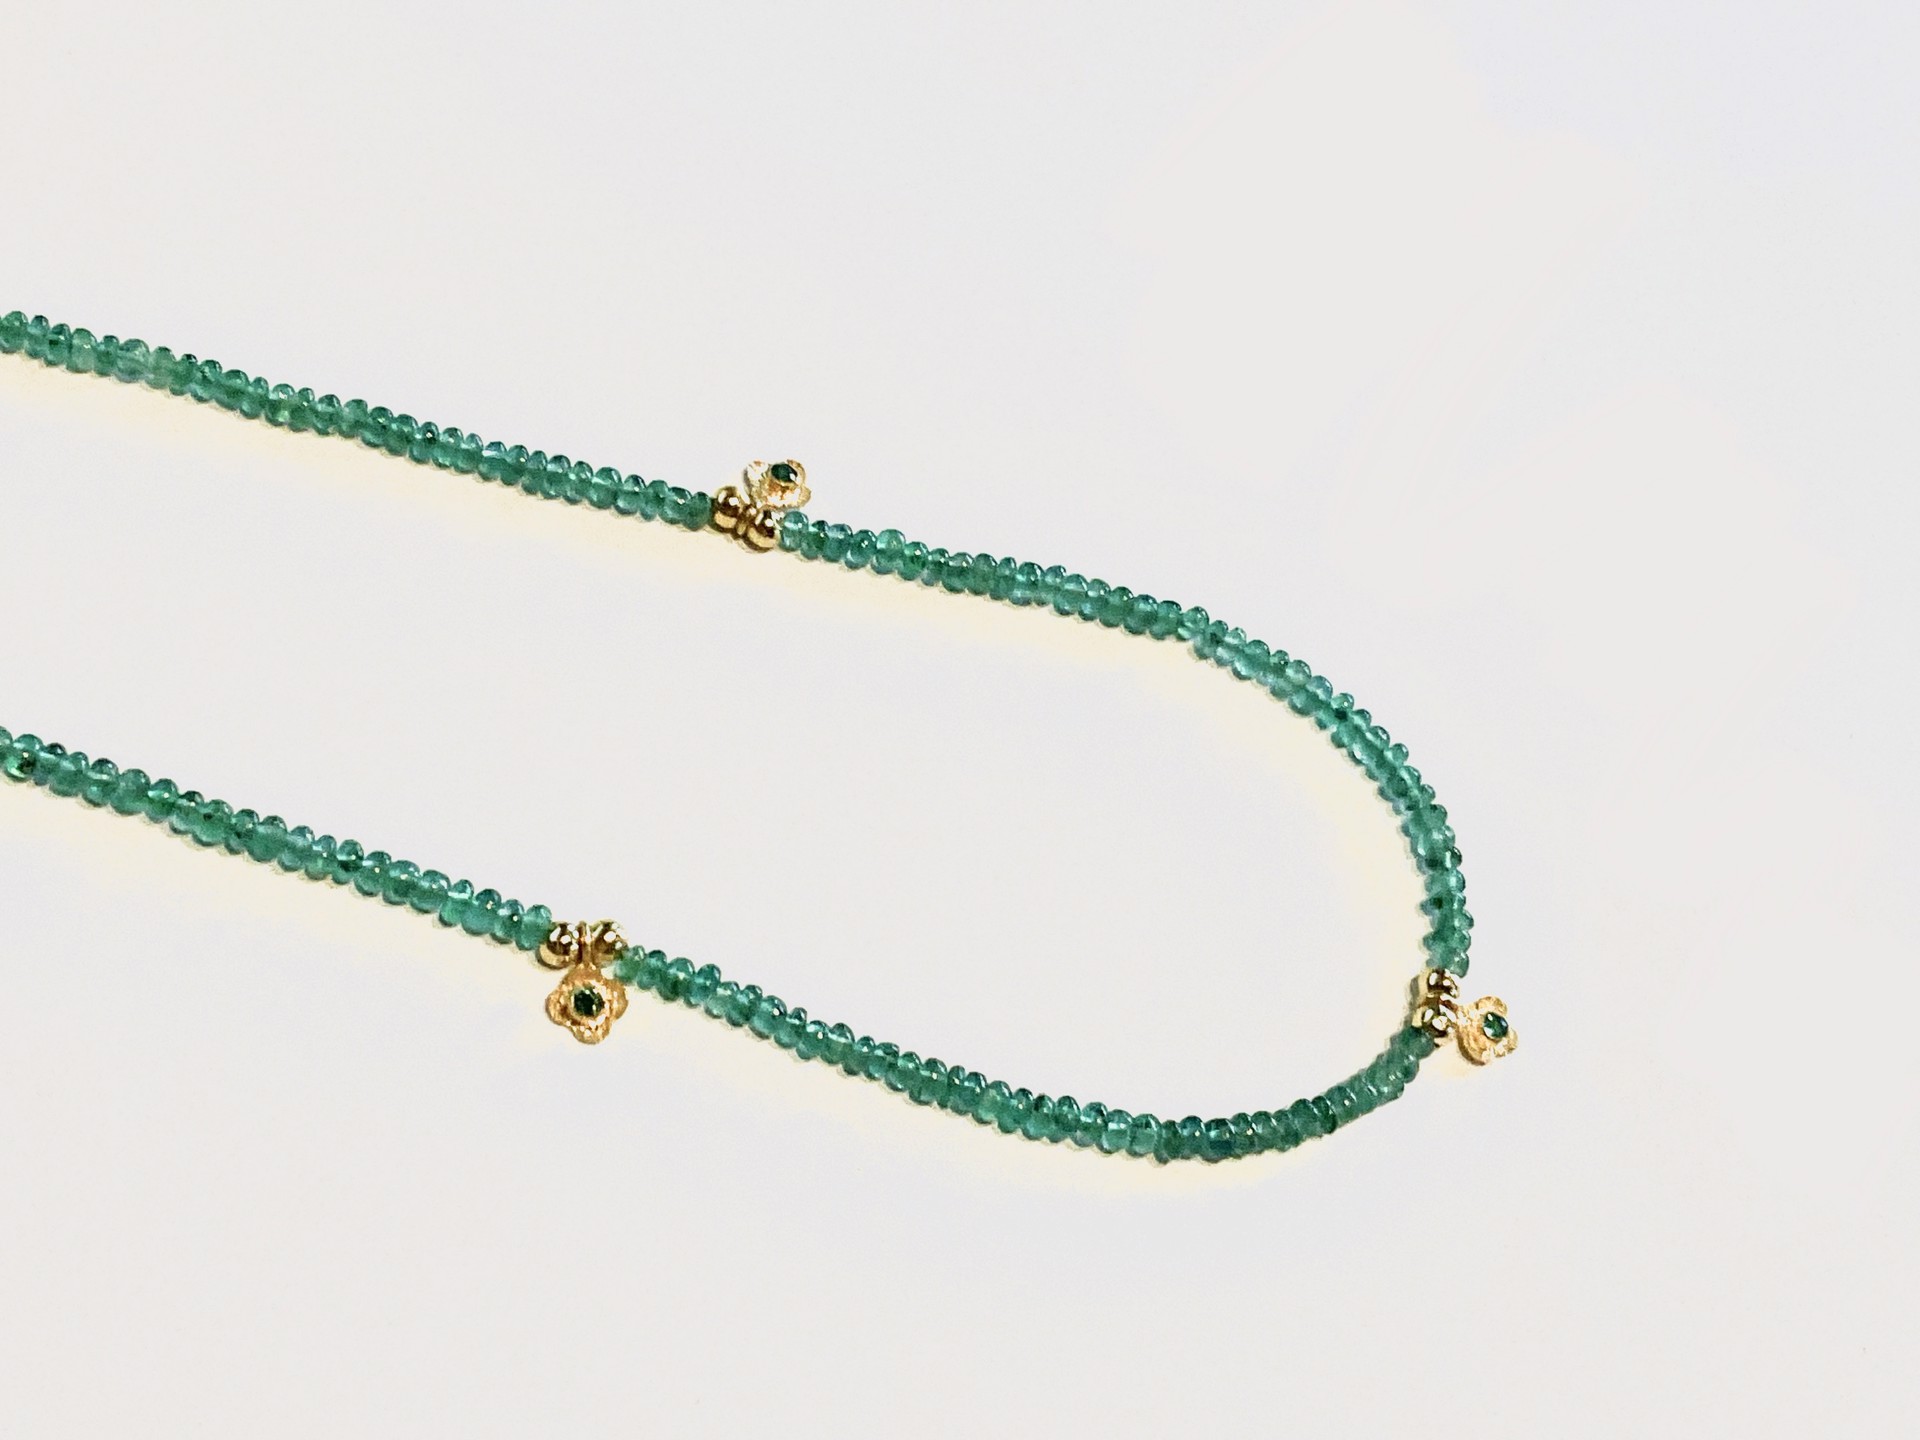 Blossom - Tiny Emeralds 18k Gold Blossom Charms by Mara Labell